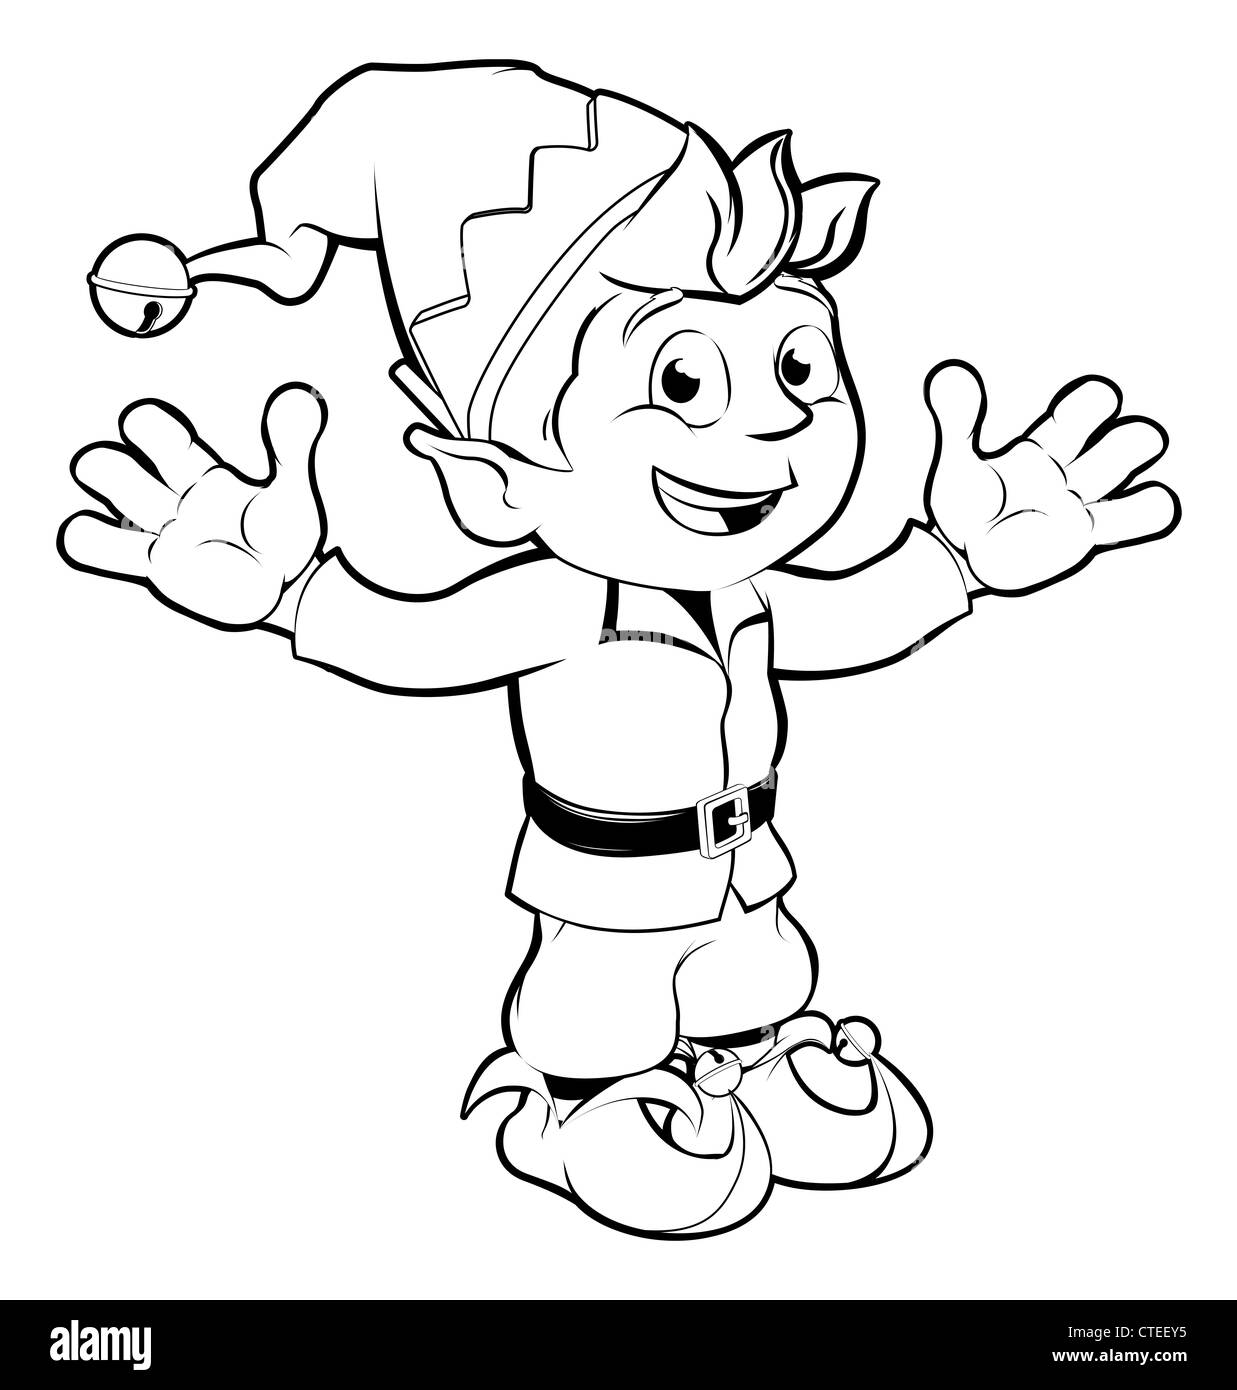 Monochrome drawing of happy Christmas Elf smiling and waving Stock Photo